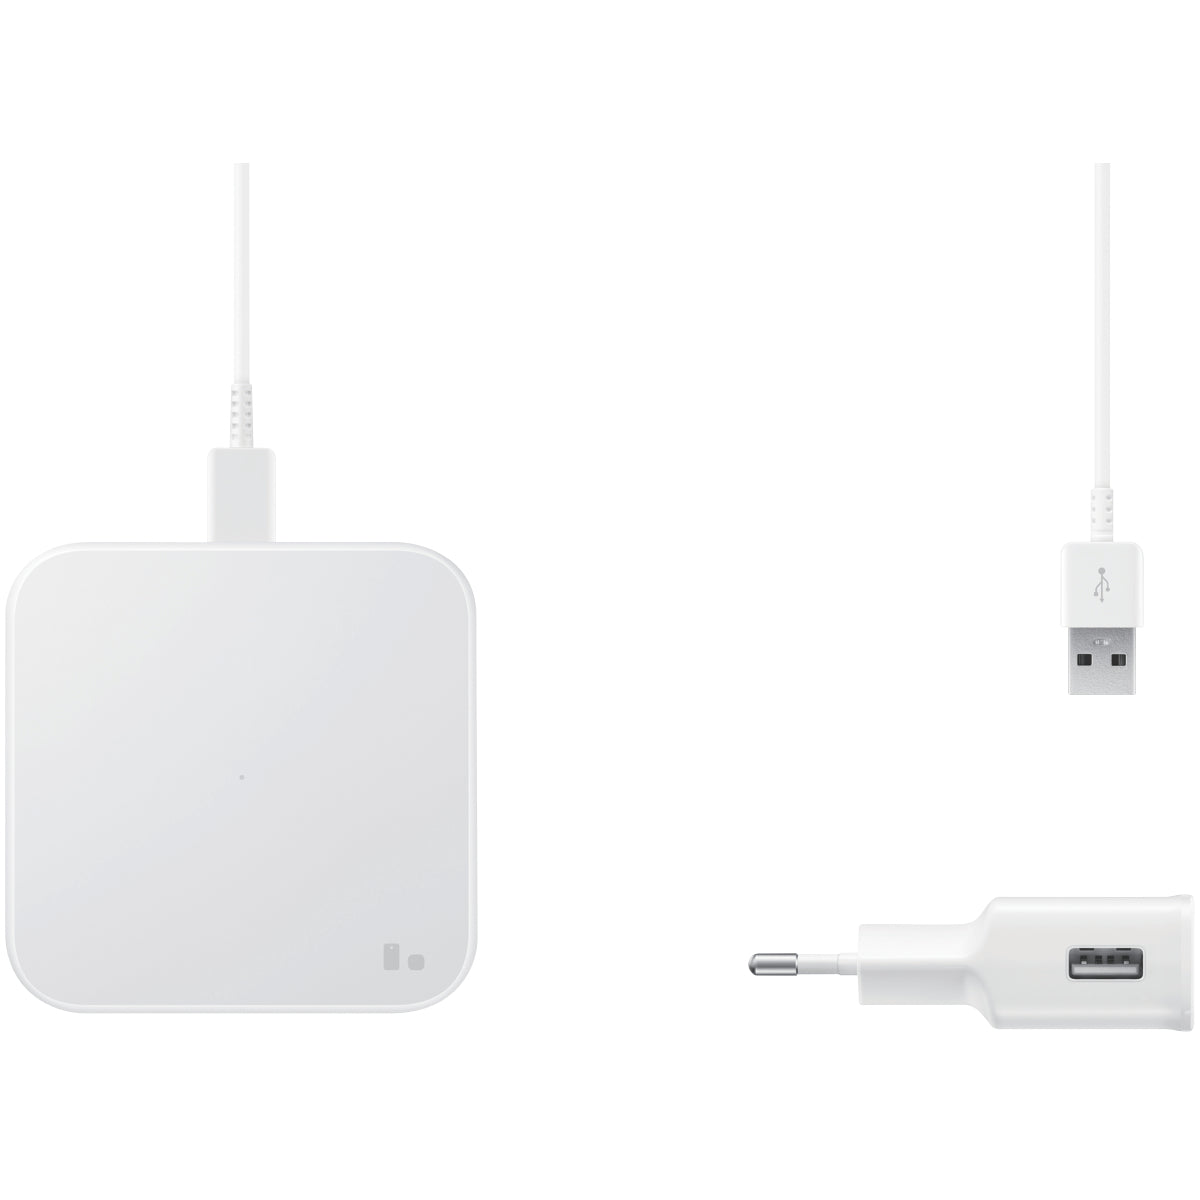 Samsung Wireless Charger and Charger Pad - White